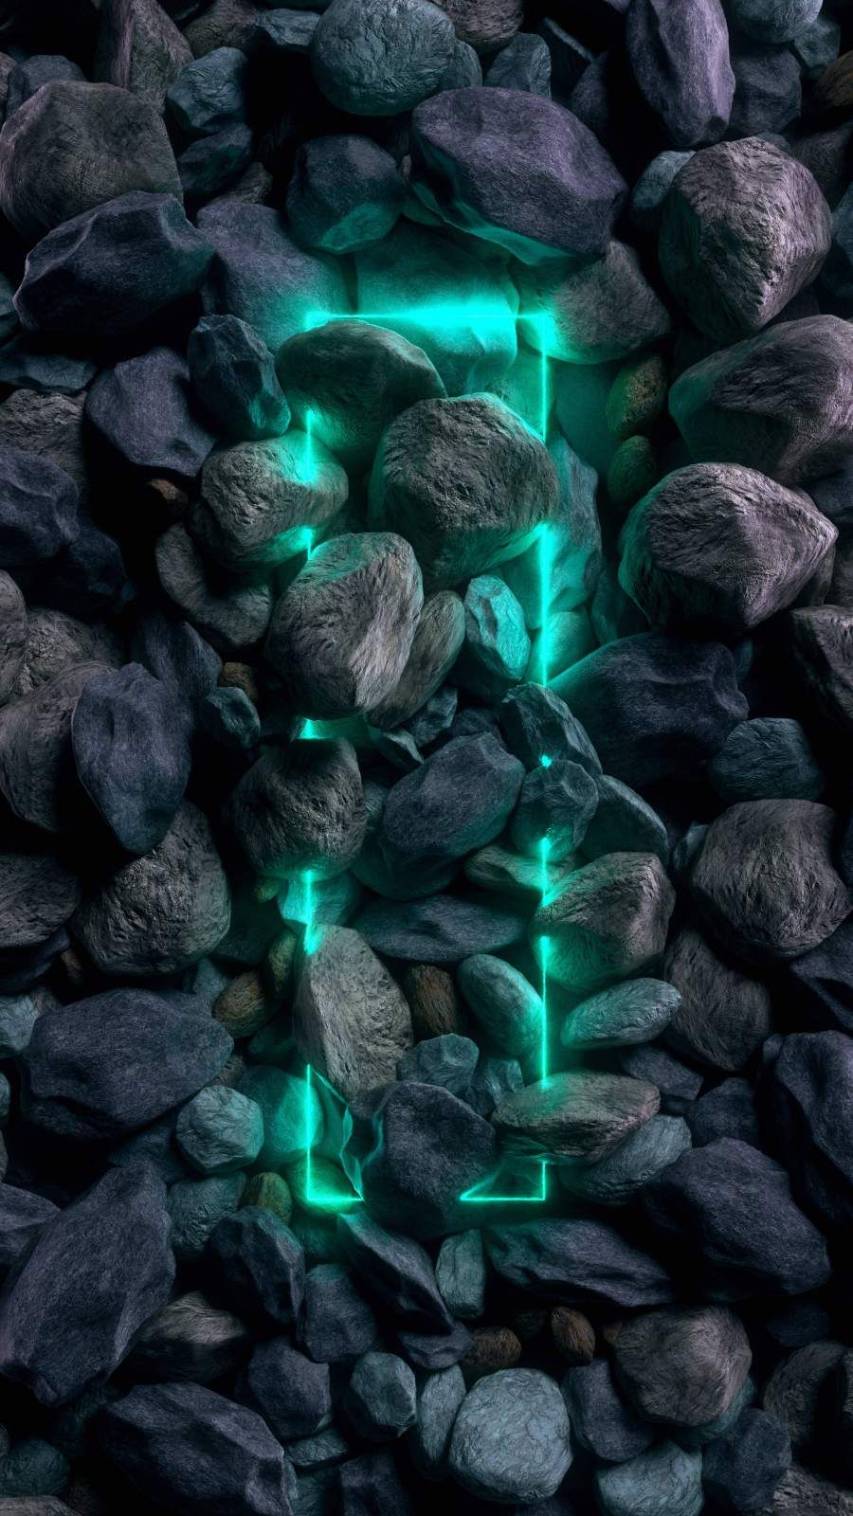 Amazing Neon Stone Wallpaper images for iPhone